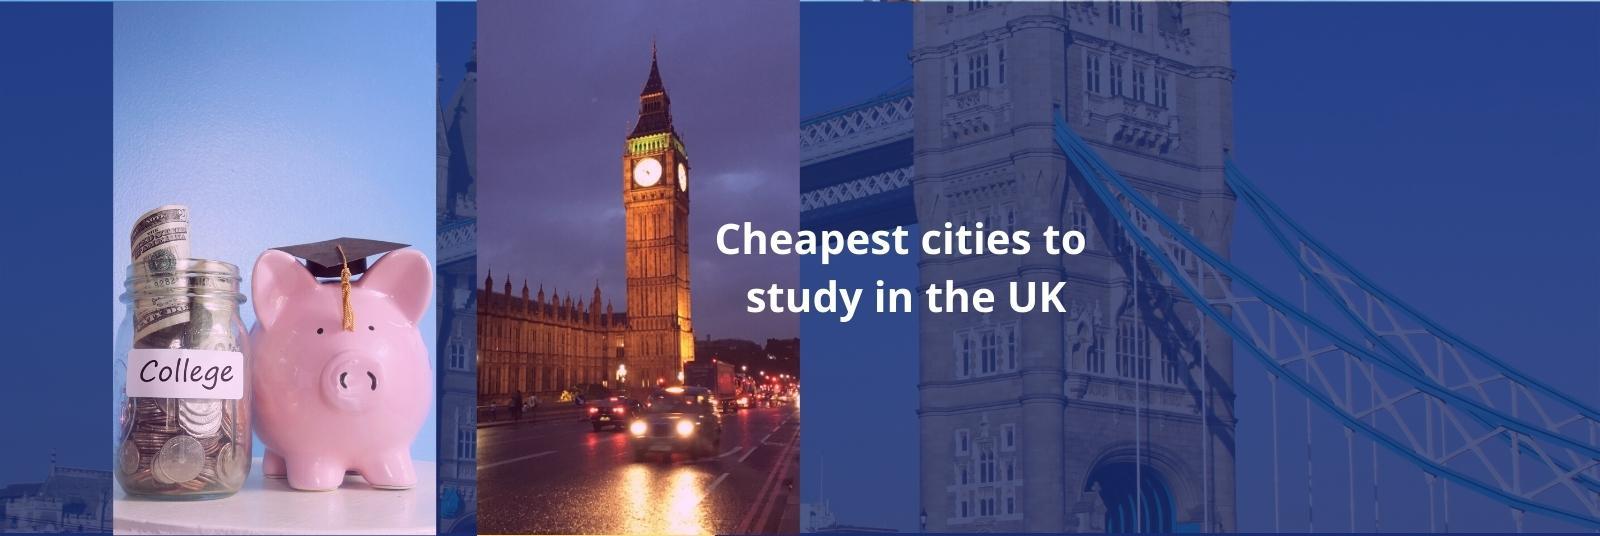 10 Cheapest cities to study in the UK